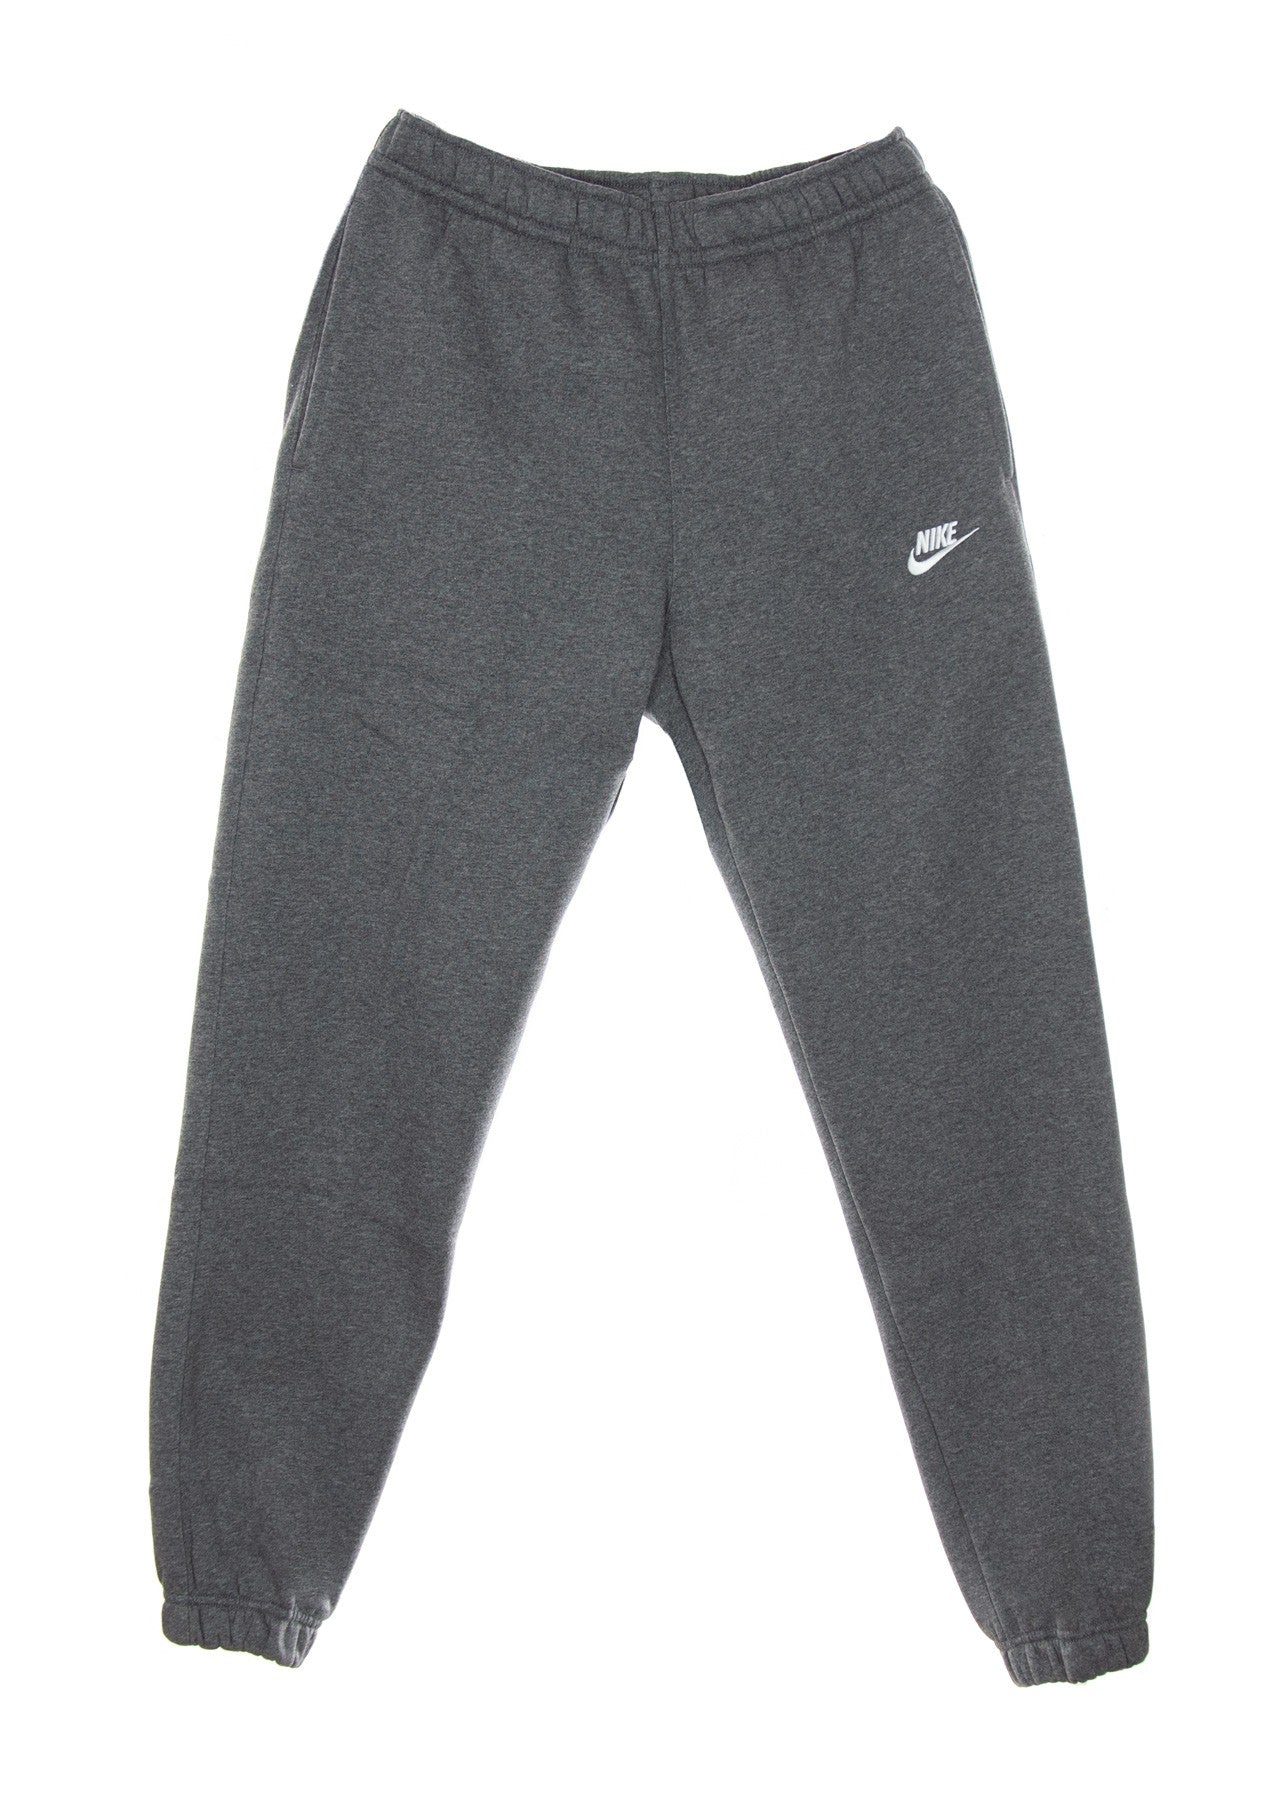 Men's Sportswear Club Fleece Tracksuit Pants Charcoal Heather/anthracite/white